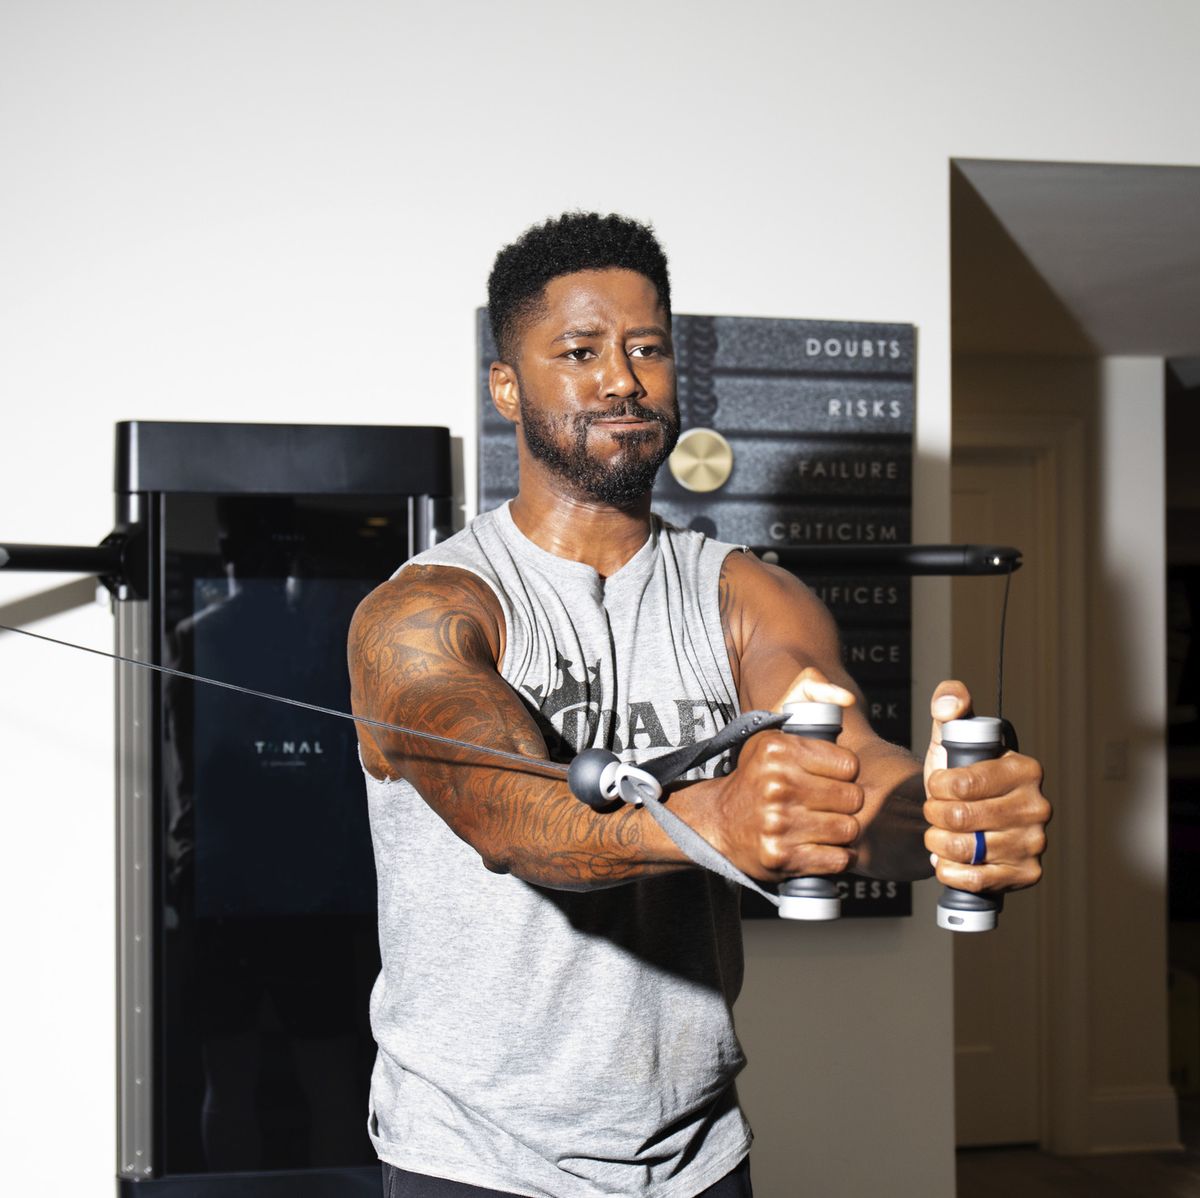 CBS' Nate Burleson Shares His Home Training Workout Routine